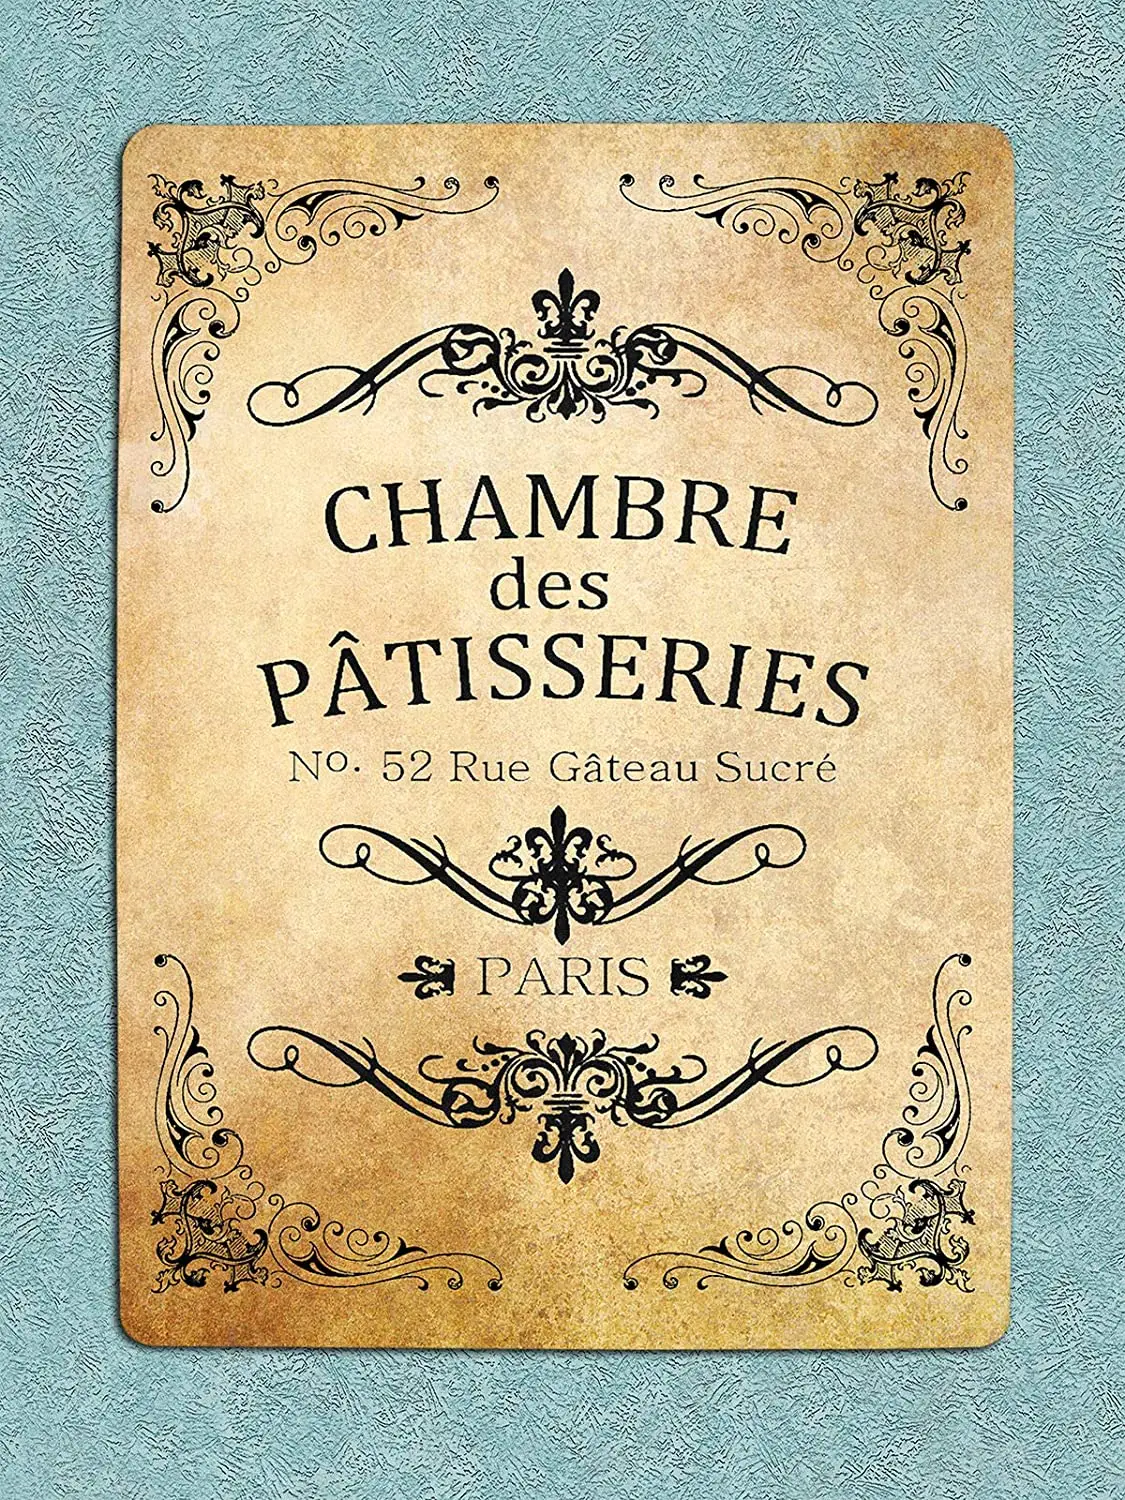 

New Vintage Metal Tin Sign French Paris Chamber Des Patisseries Pastry Room Street Garage & Home Bar Club Kitchen Hotel